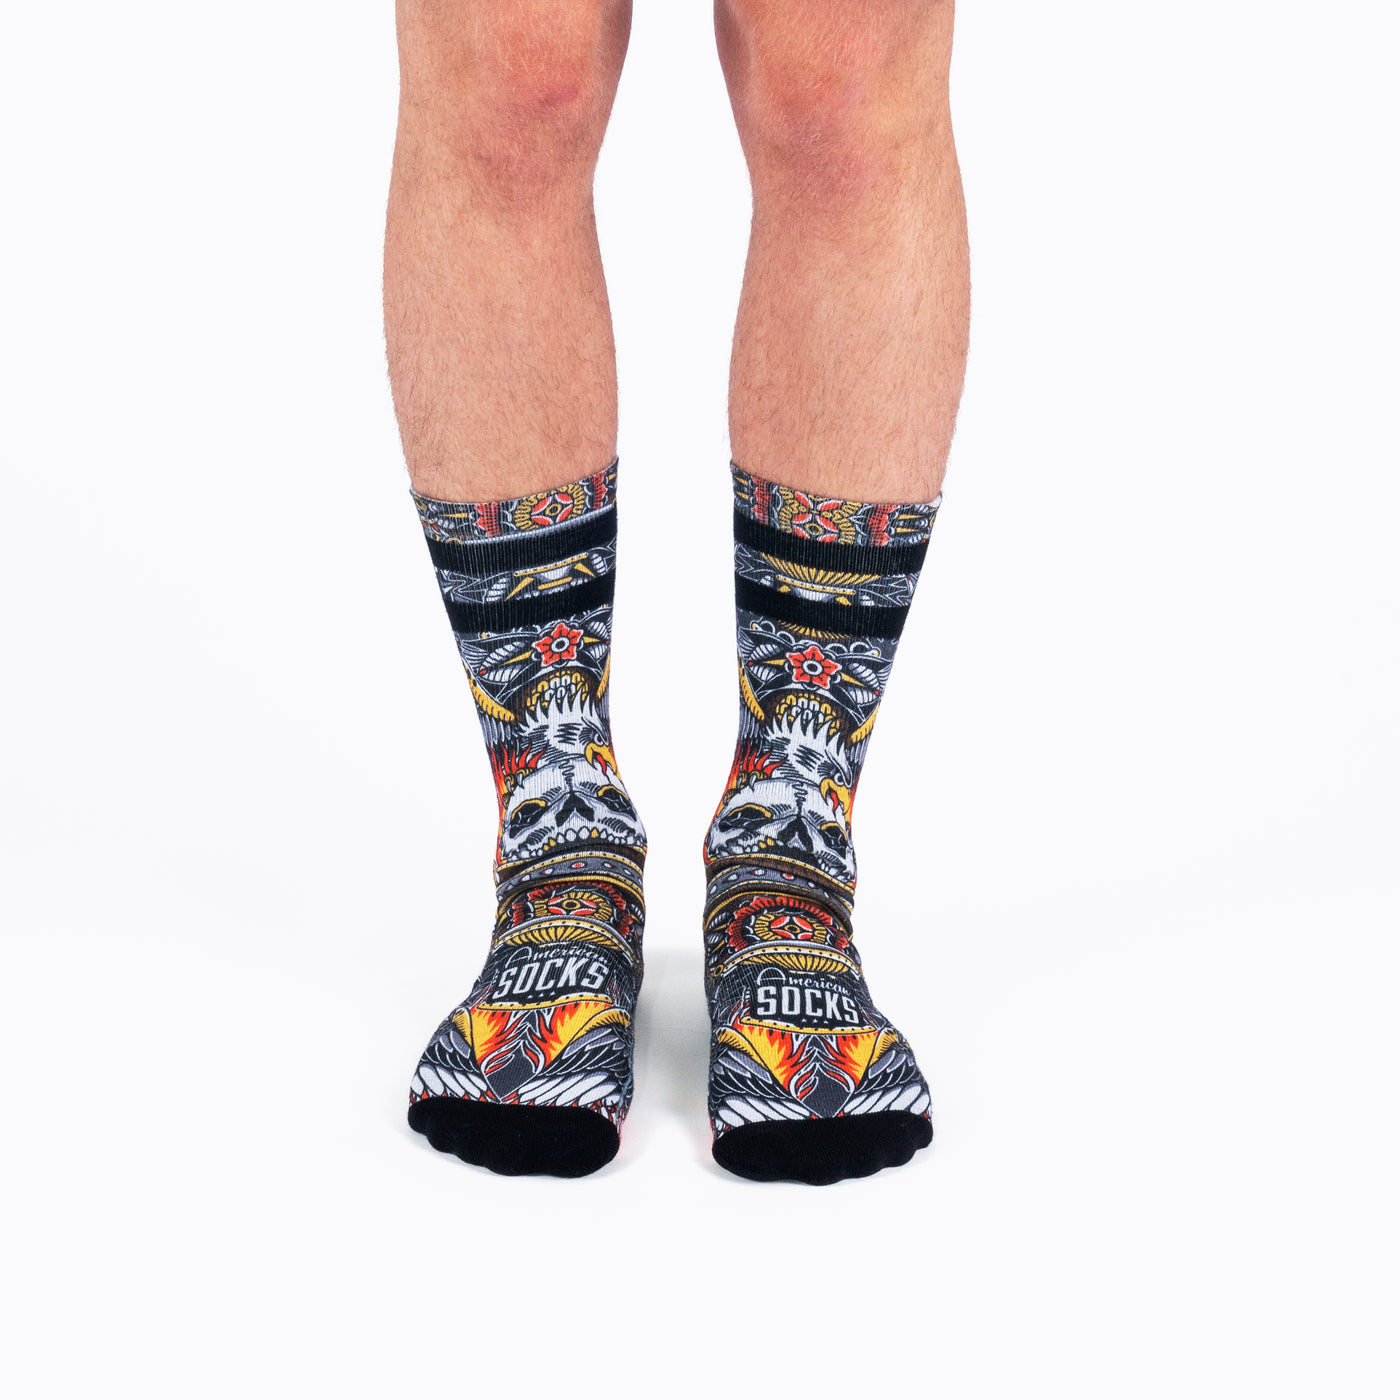 Eagle of Fire - Mid High - AmericanSocks